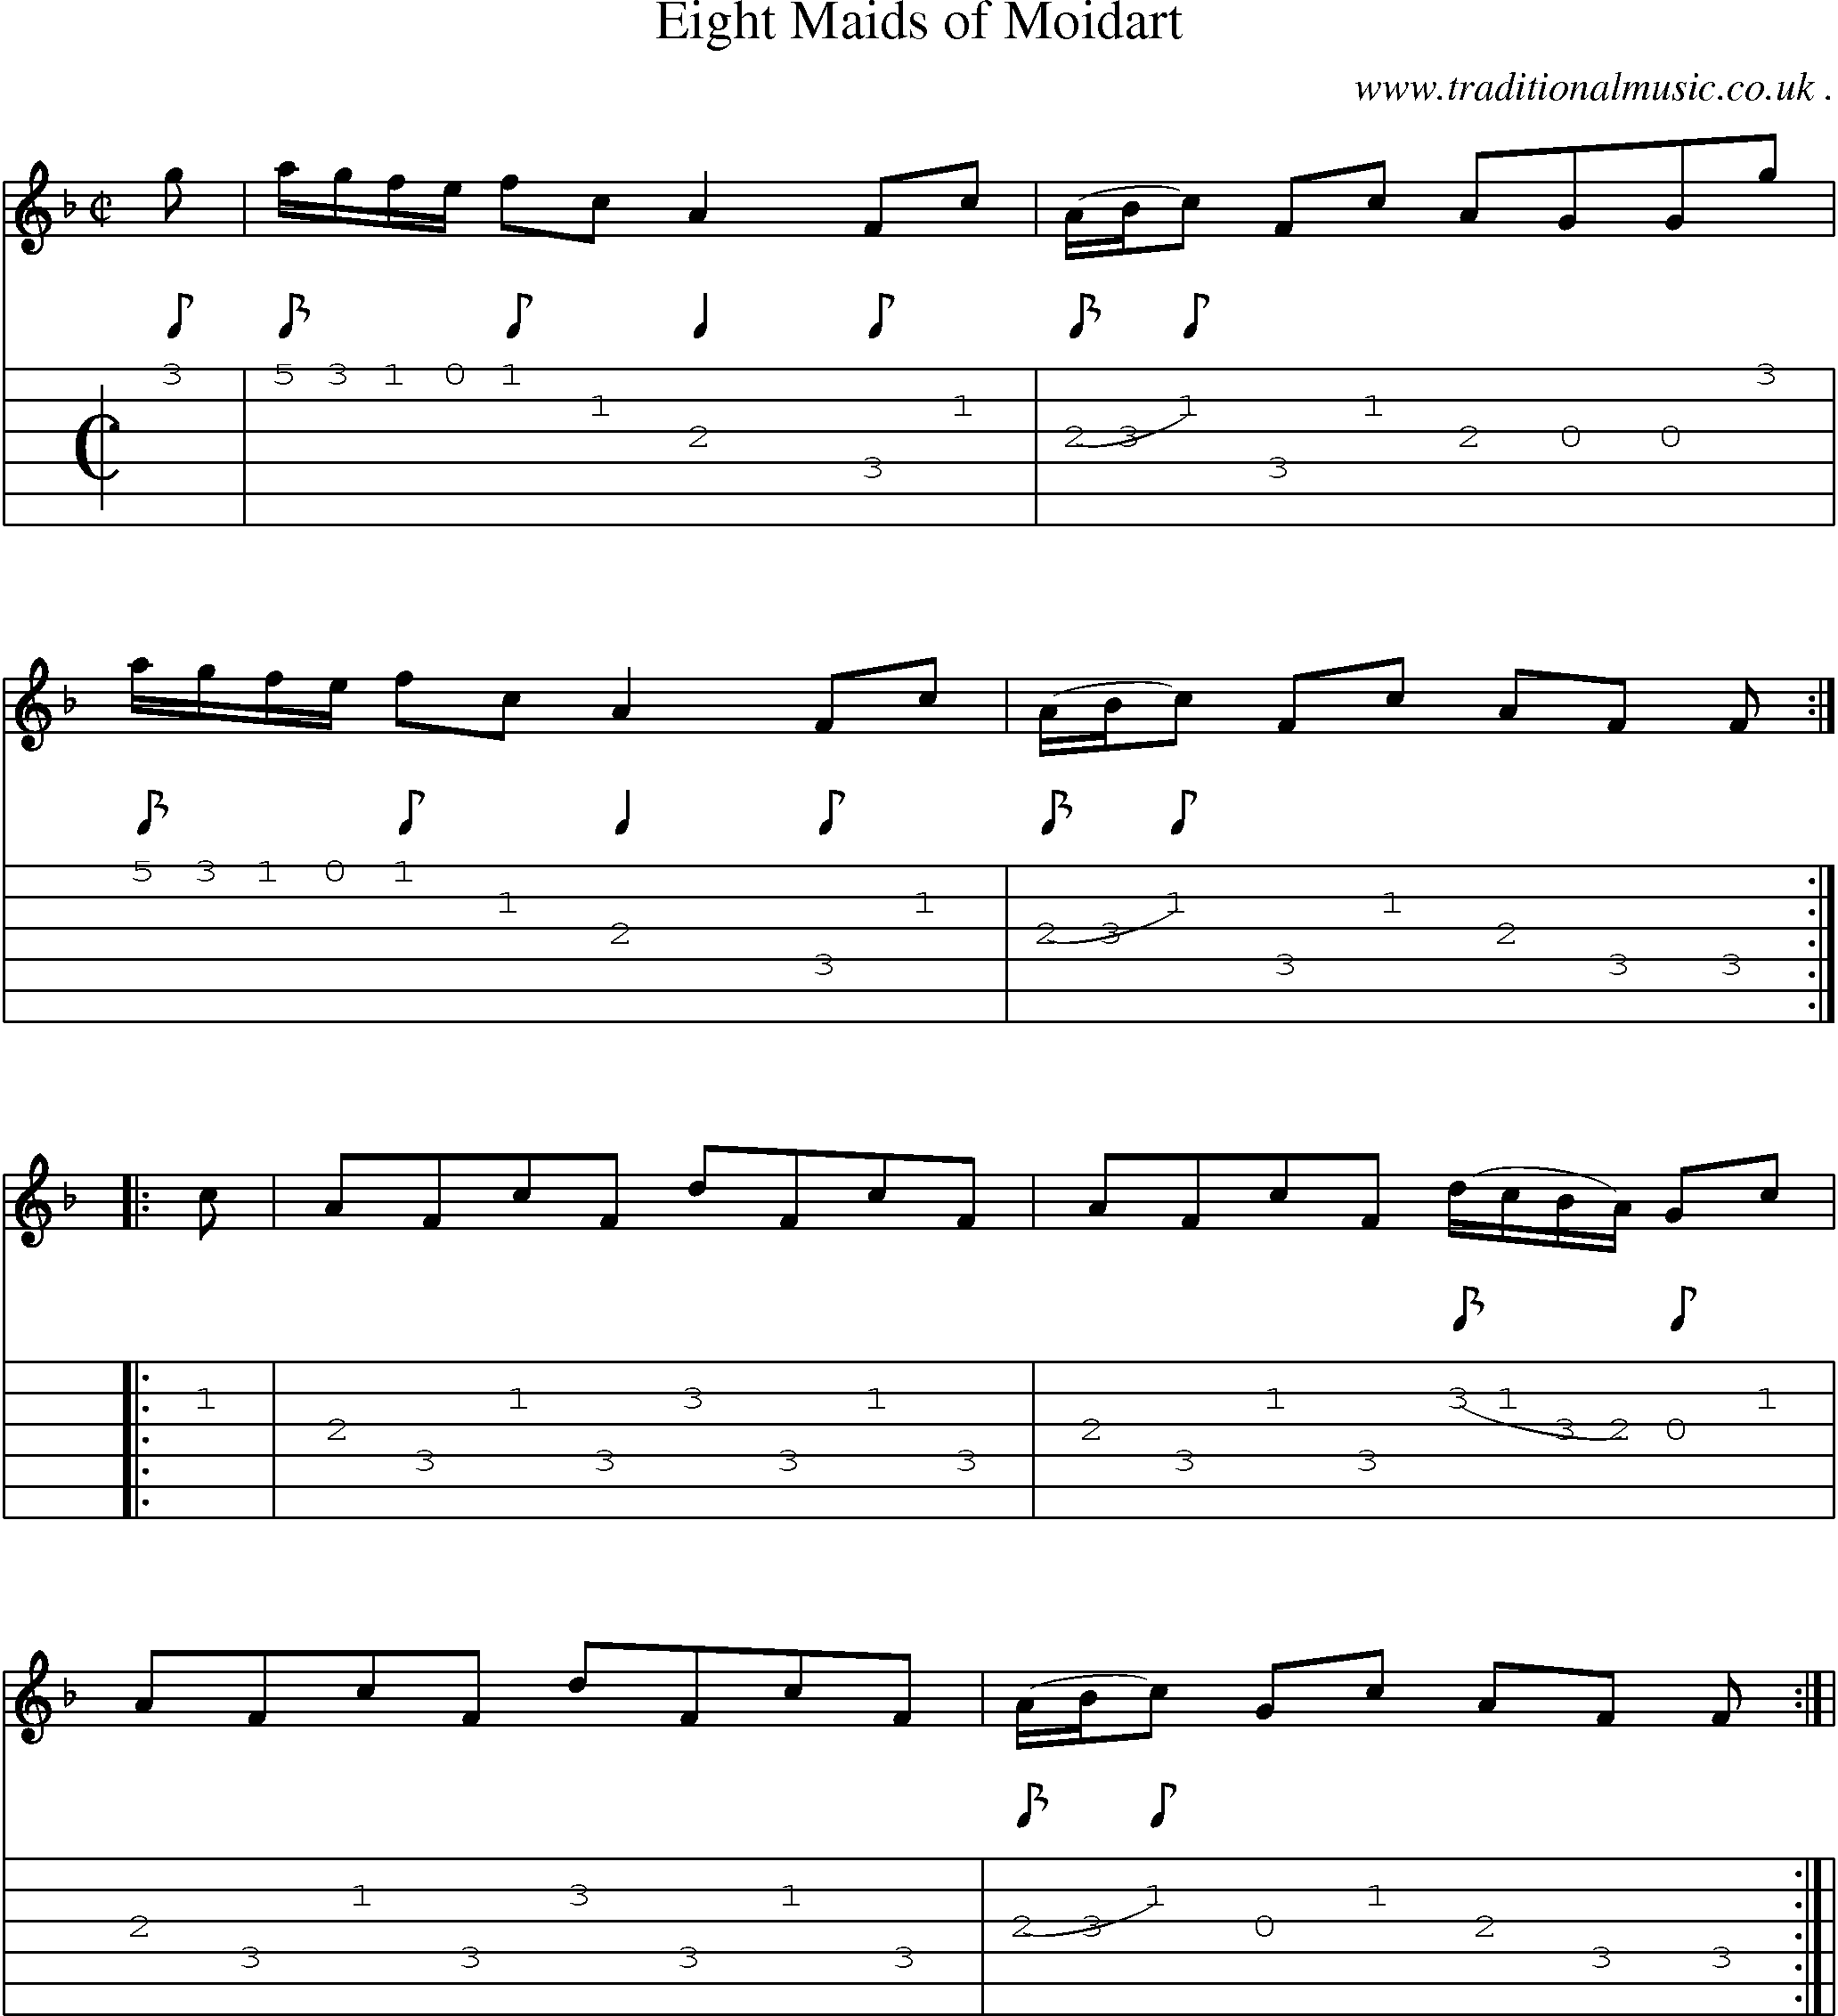 Sheet-Music and Guitar Tabs for Eight Maids Of Moidart